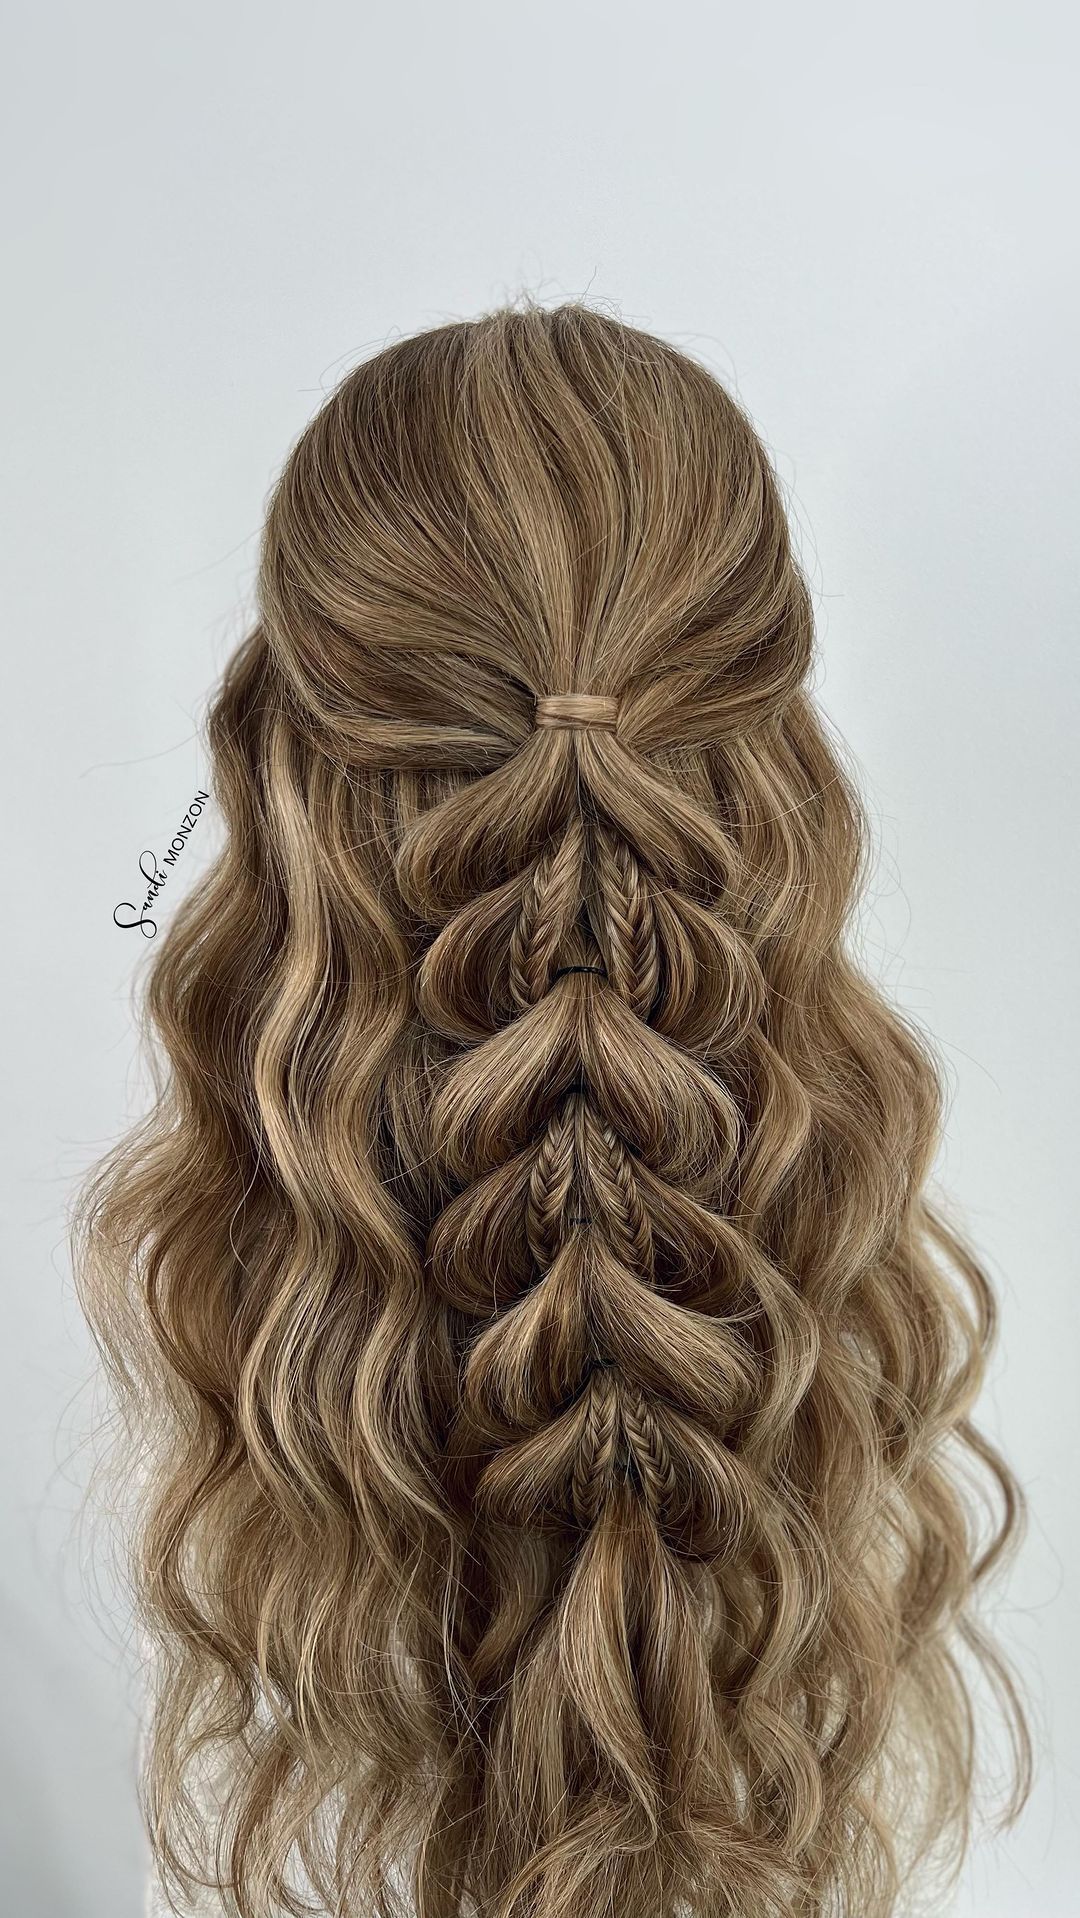 Braids of Beauty: Exploring Stylish Hairstyles with Braids